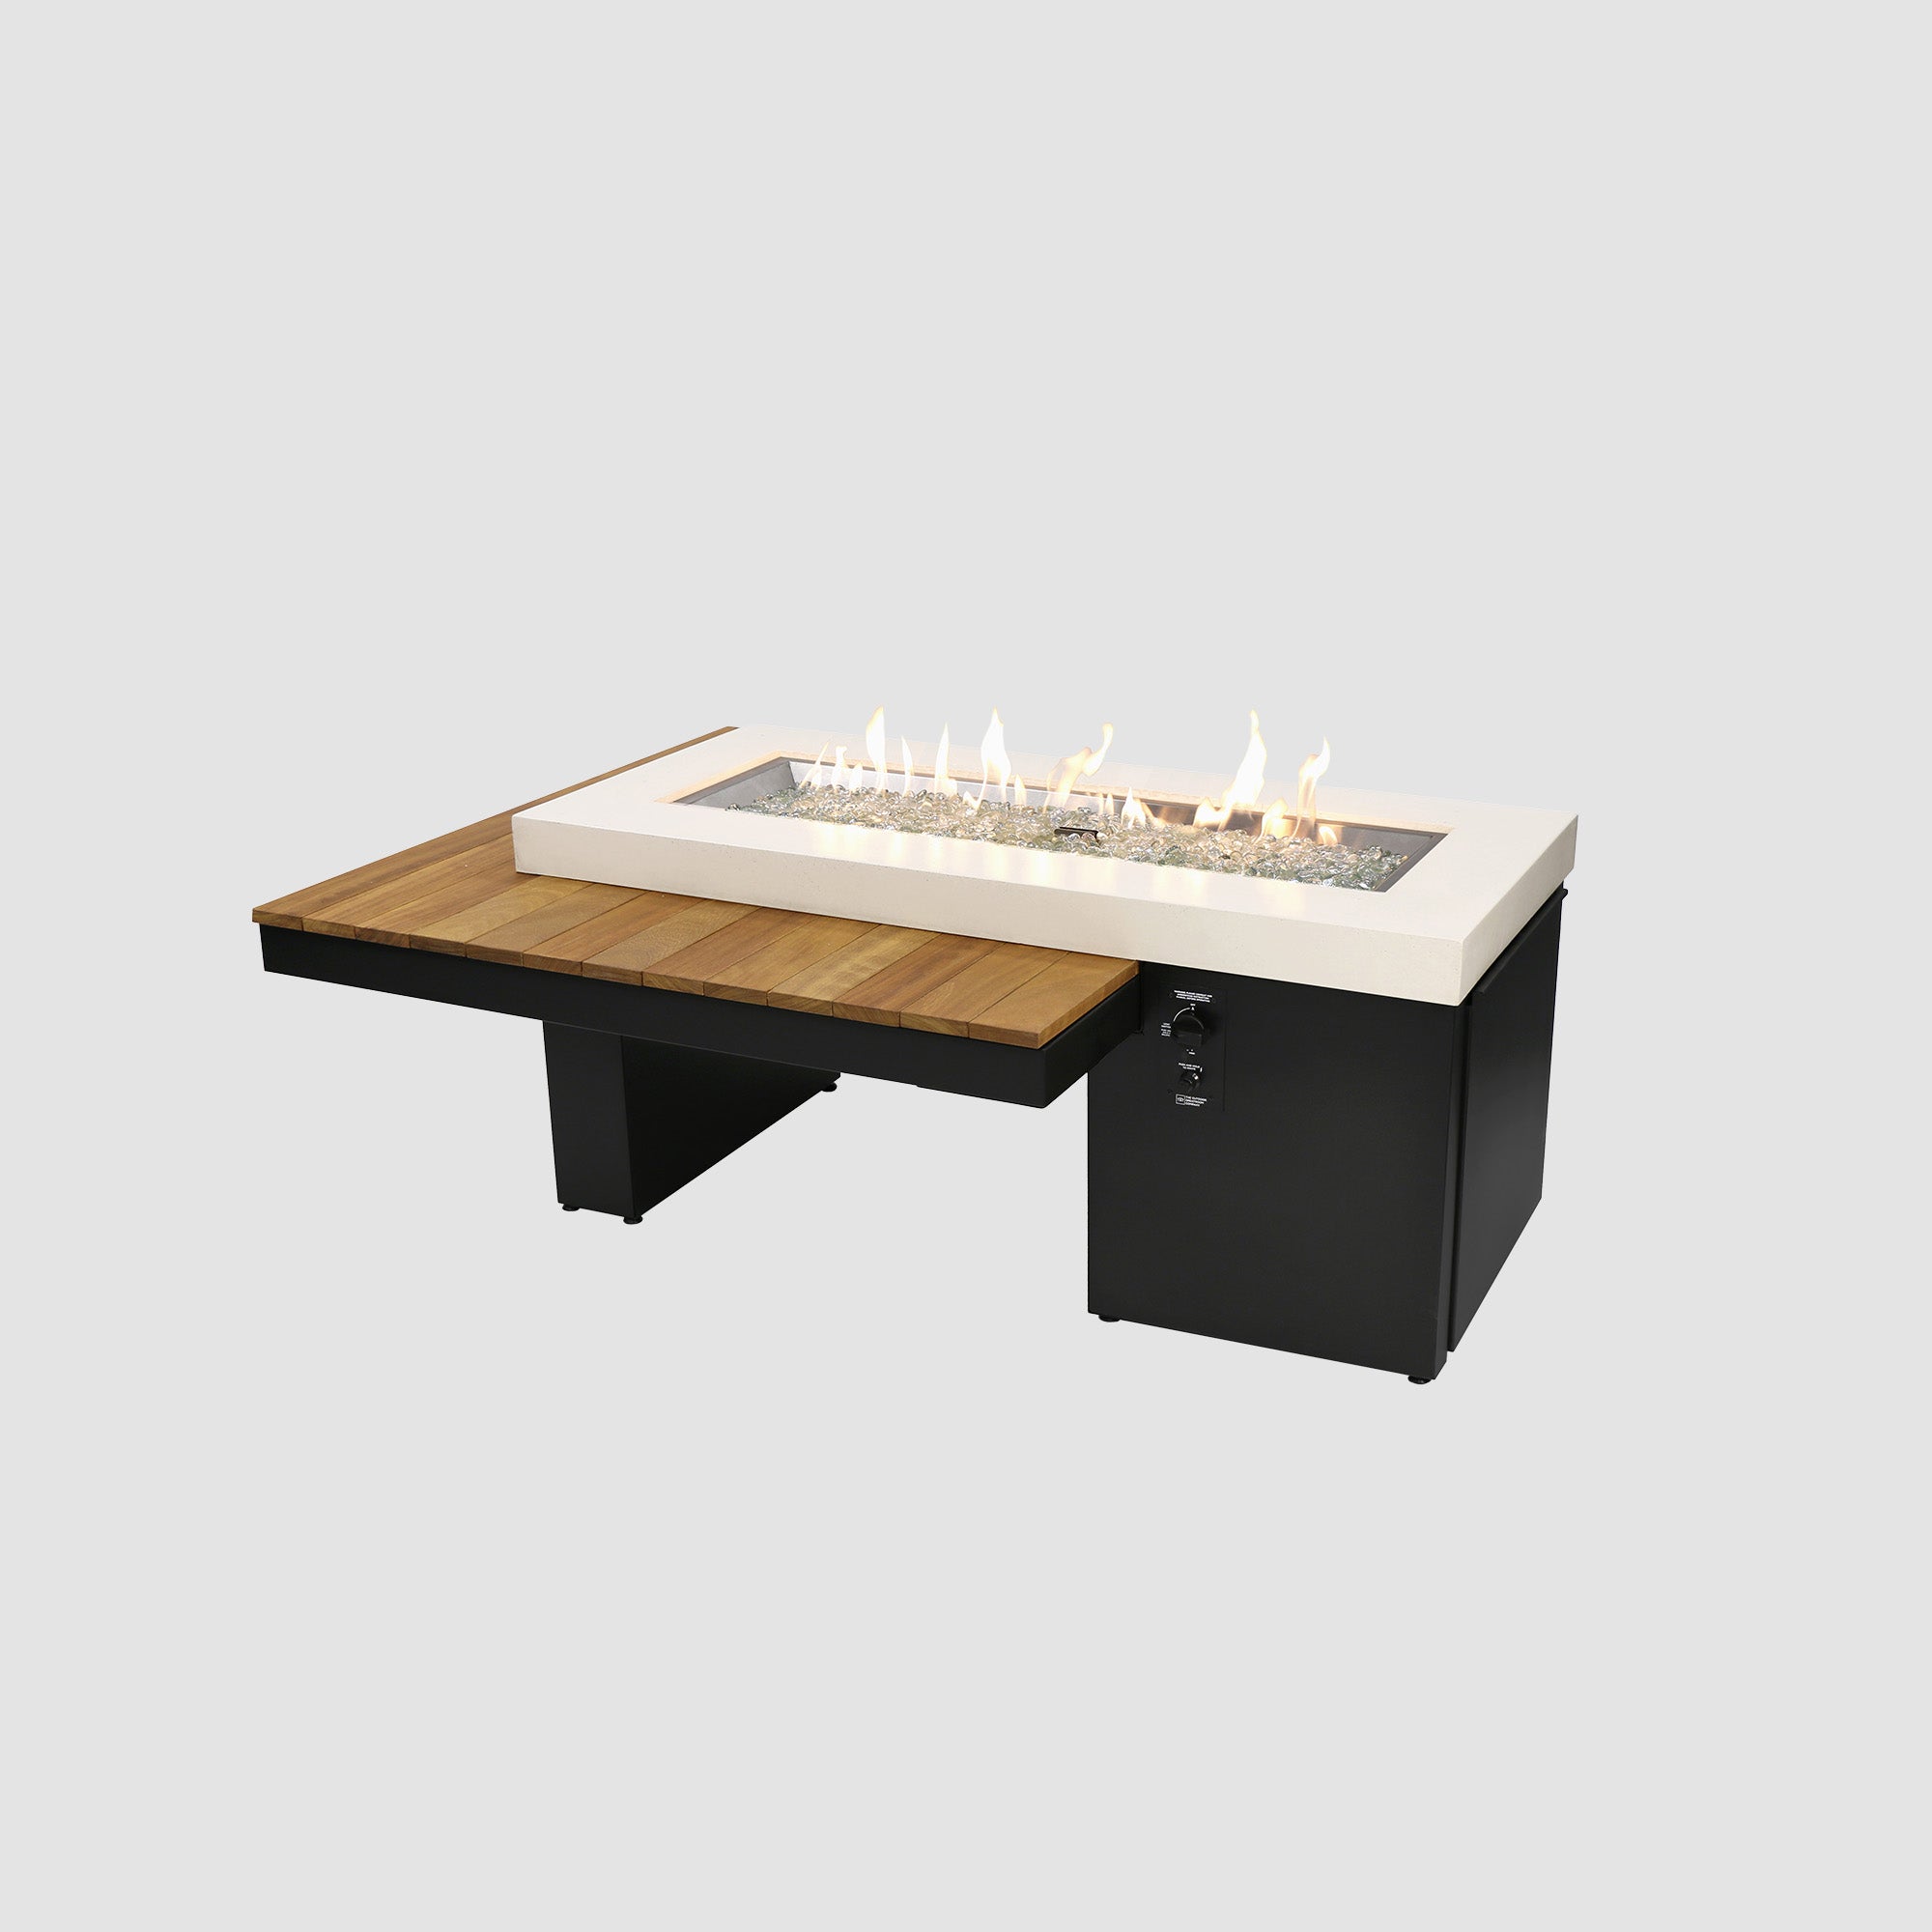 Uptown Iroko Linear gas Fire Pit Table